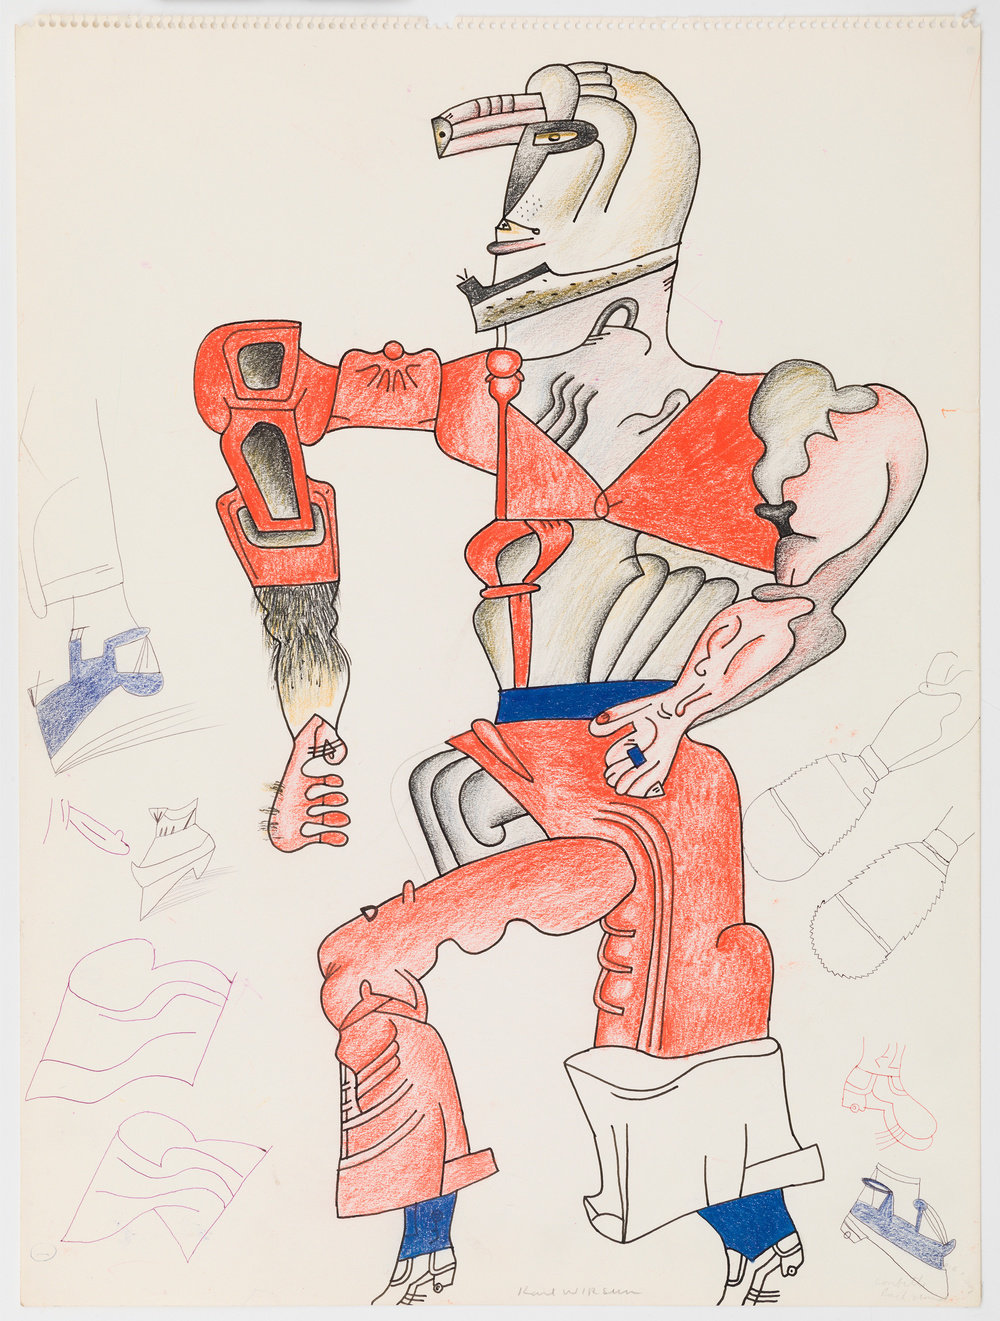 A graphite, ink, and color pencil on paper drawing by Karl Wirsum of a boldly outlined, anthropomorphic or cyborg figure surrounded by several lightly rendered sketches.